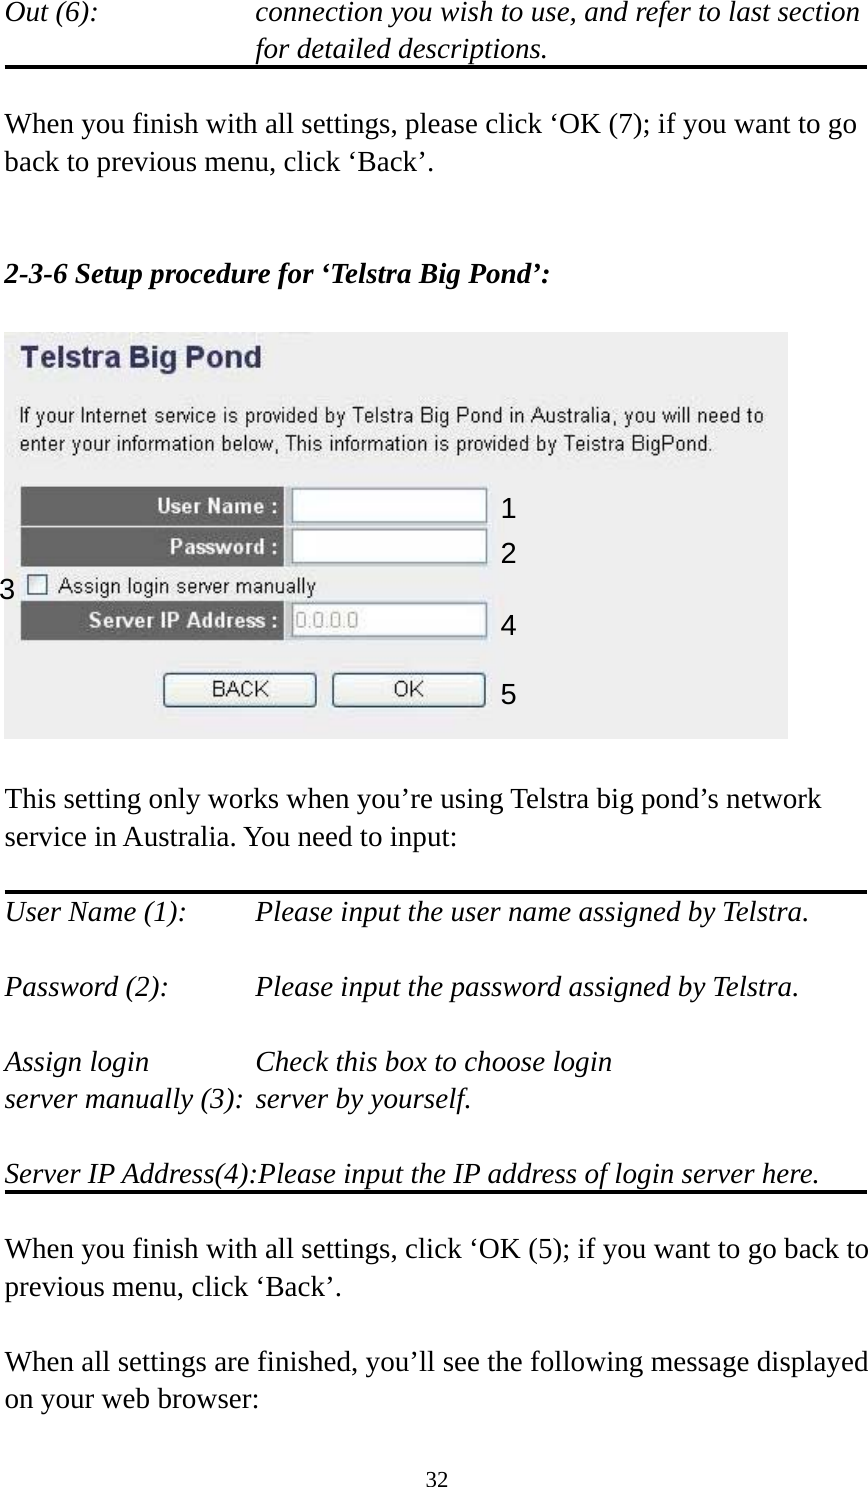 32 Out (6):    connection you wish to use, and refer to last section for detailed descriptions.  When you finish with all settings, please click ‘OK (7); if you want to go back to previous menu, click ‘Back’.   2-3-6 Setup procedure for ‘Telstra Big Pond’:    This setting only works when you’re using Telstra big pond’s network service in Australia. You need to input:  User Name (1):     Please input the user name assigned by Telstra.  Password (2):      Please input the password assigned by Telstra.  Assign login          Check this box to choose login server manually (3): server by yourself.  Server IP Address(4):Please input the IP address of login server here.  When you finish with all settings, click ‘OK (5); if you want to go back to previous menu, click ‘Back’.  When all settings are finished, you’ll see the following message displayed on your web browser: 123 4 5 